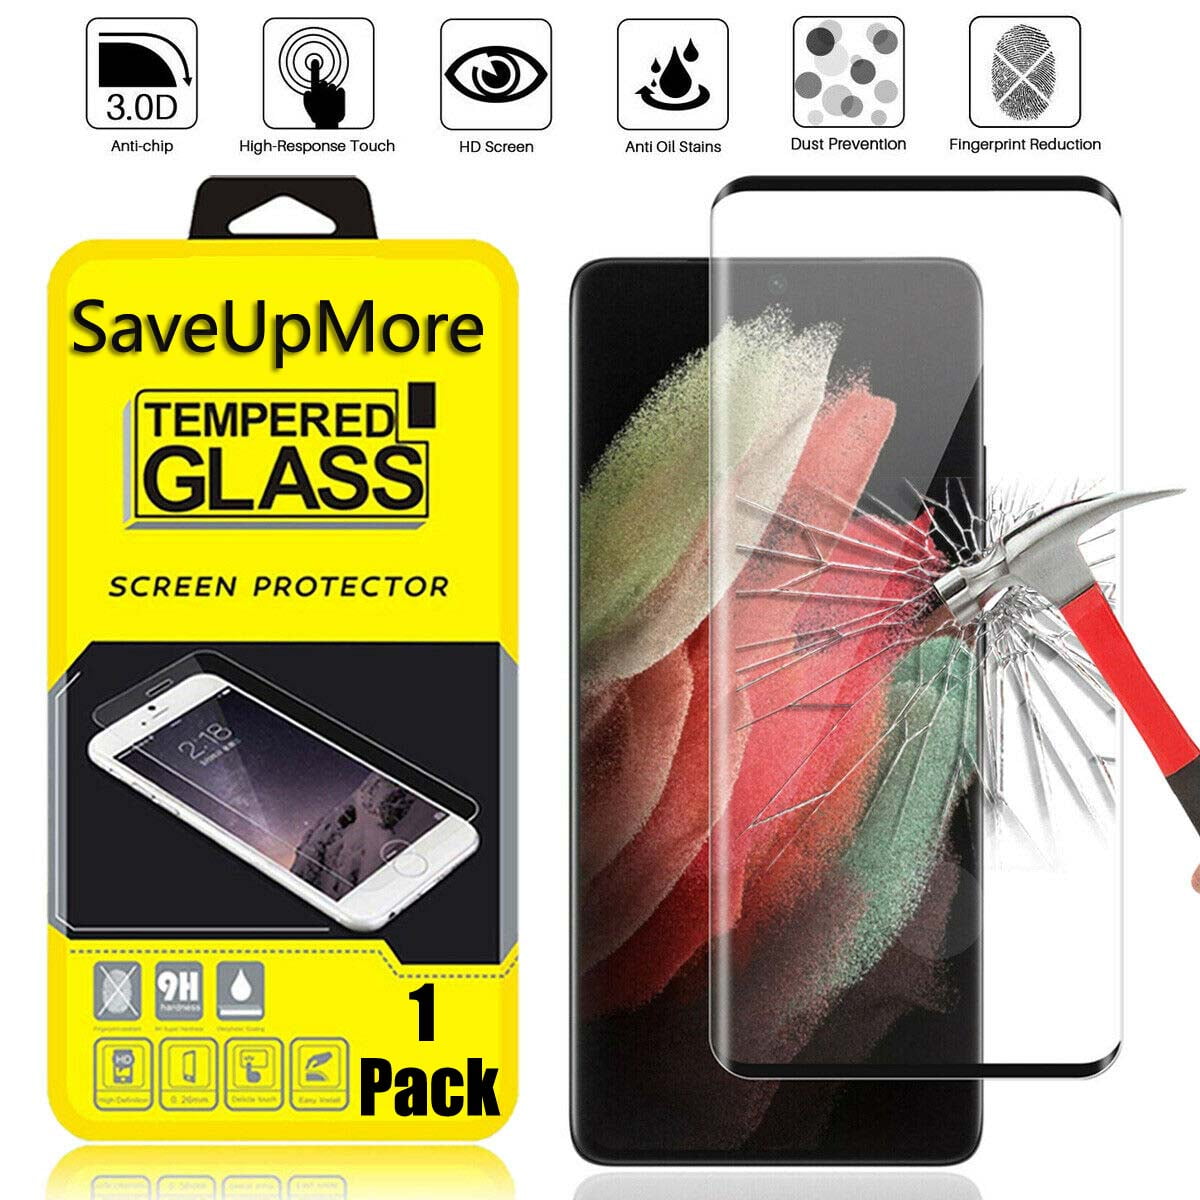 2 Pack Galaxy S21 Ultra 5G Screen Protector 3D Curved Bubble Free For Samsung Galaxy S21 Ultra 6.8 9H Hardness HD Tempered Glass Screen Protector & Privacy Tempered Glass Protector 